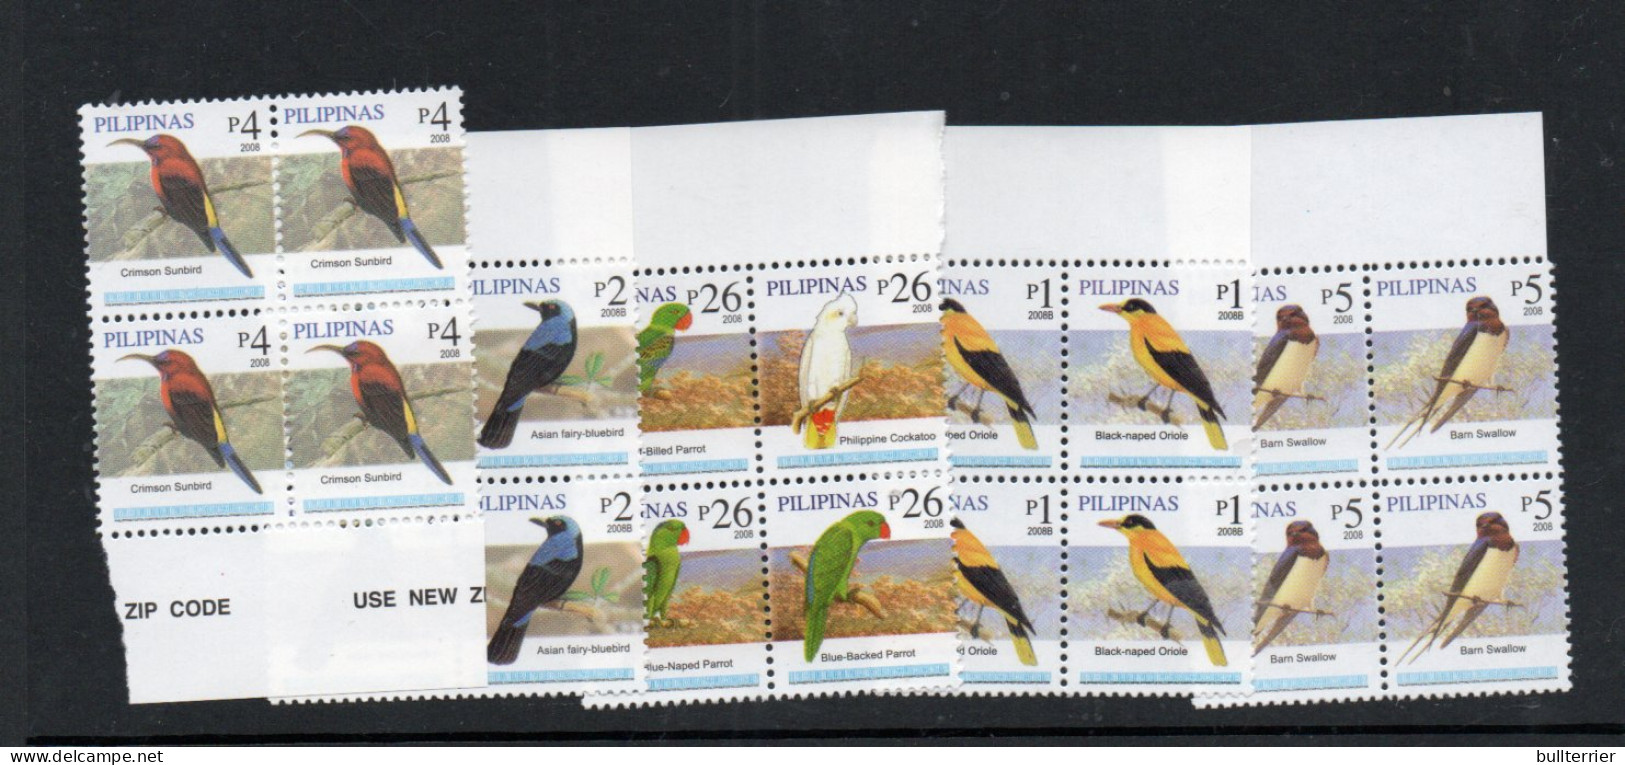 BIRDS - PHILIPPINES - 2007 - BIRDS SELECTION IN BLOCKS OF 4  MINT NEVER HINGED  - Owls